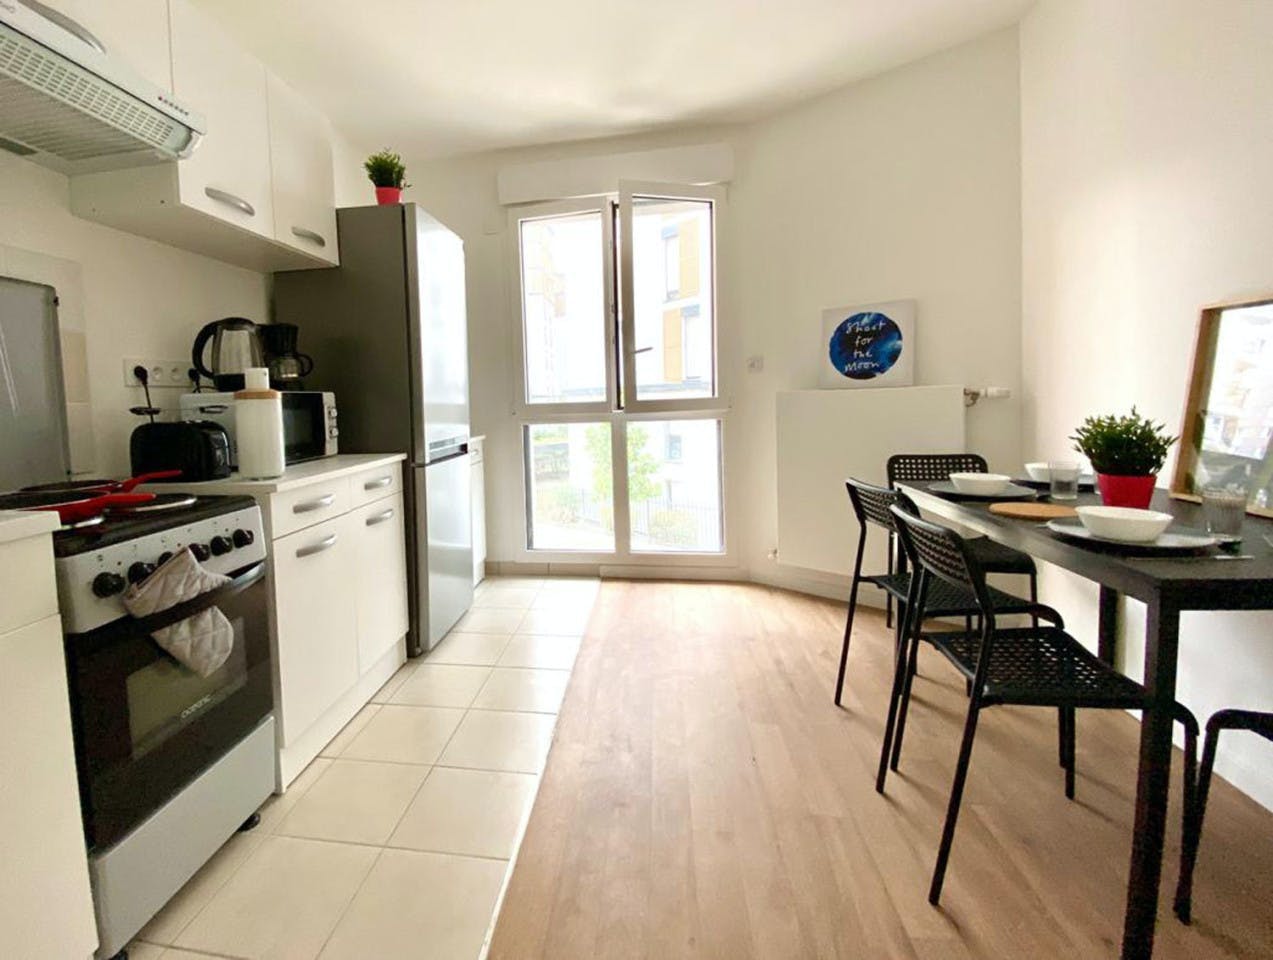 Superb apartment located in Clichy